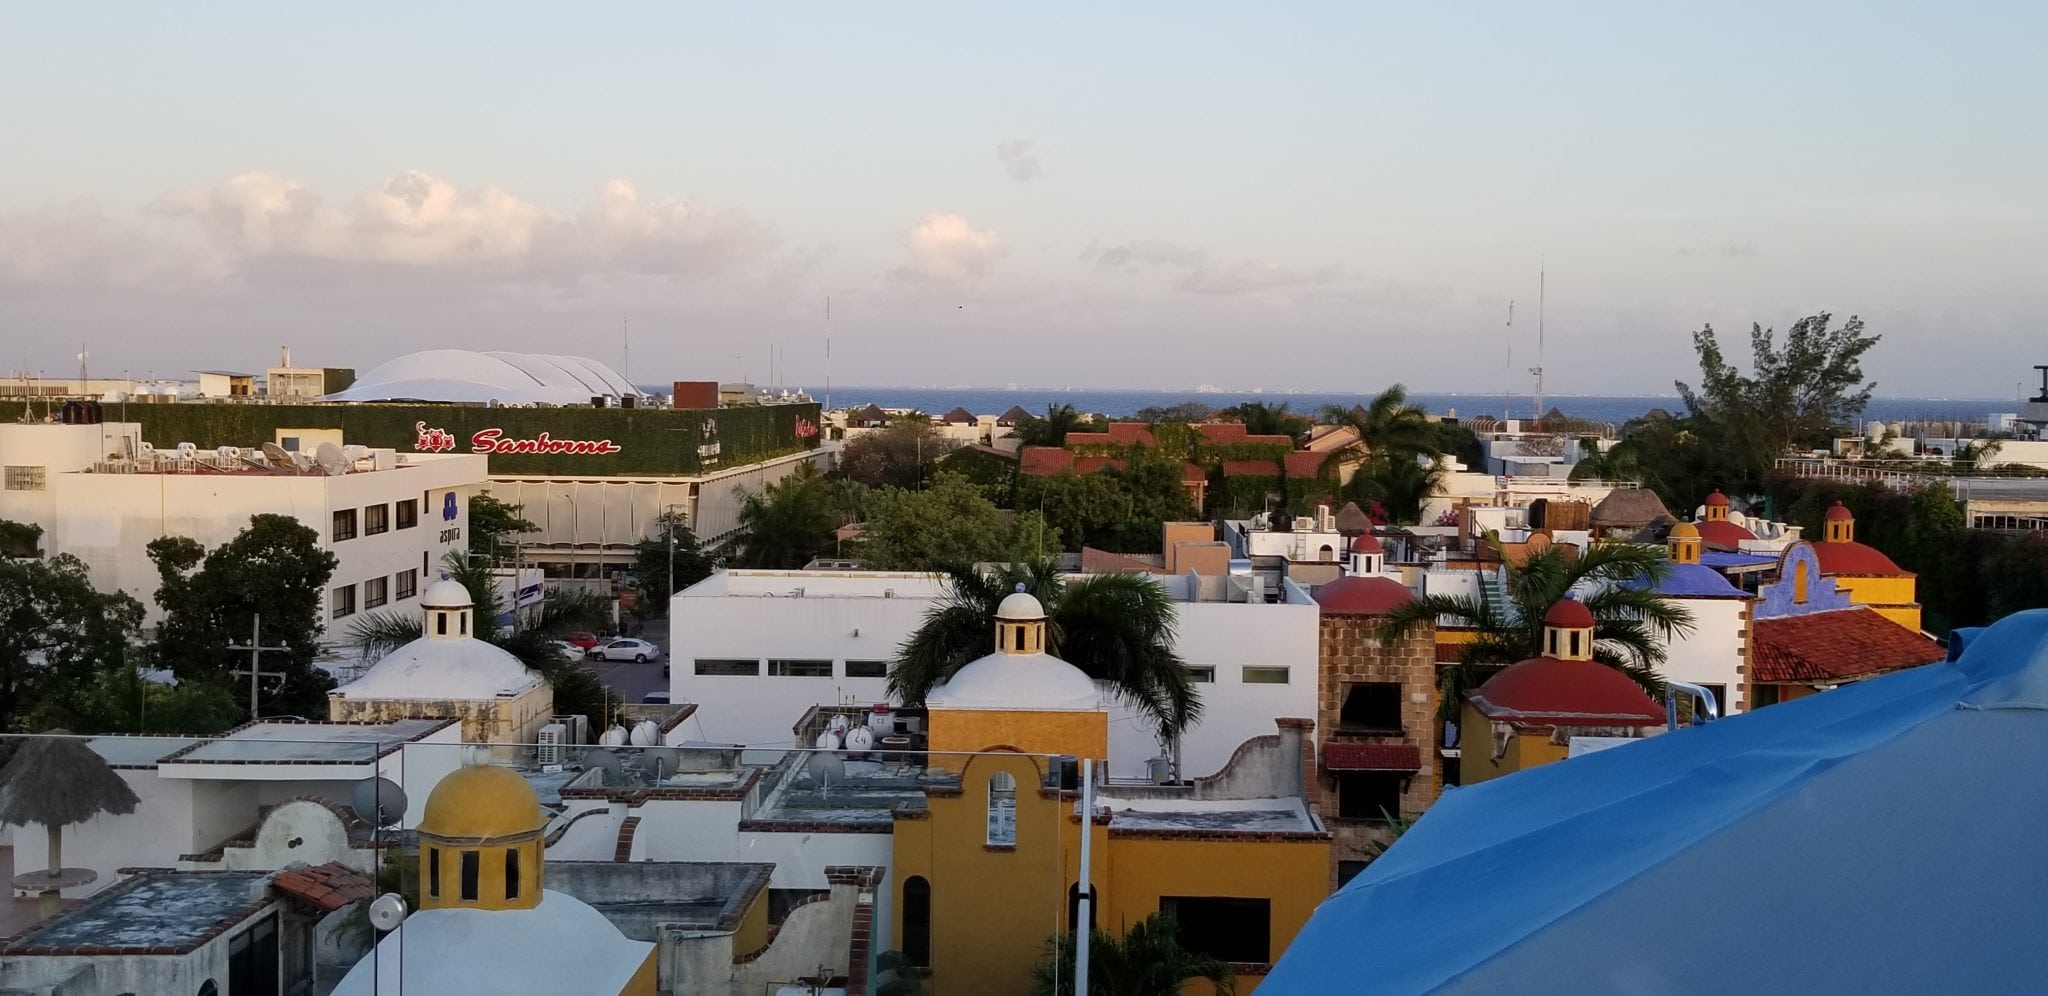 5 Things We Love About Playa del Carmen, Mexico